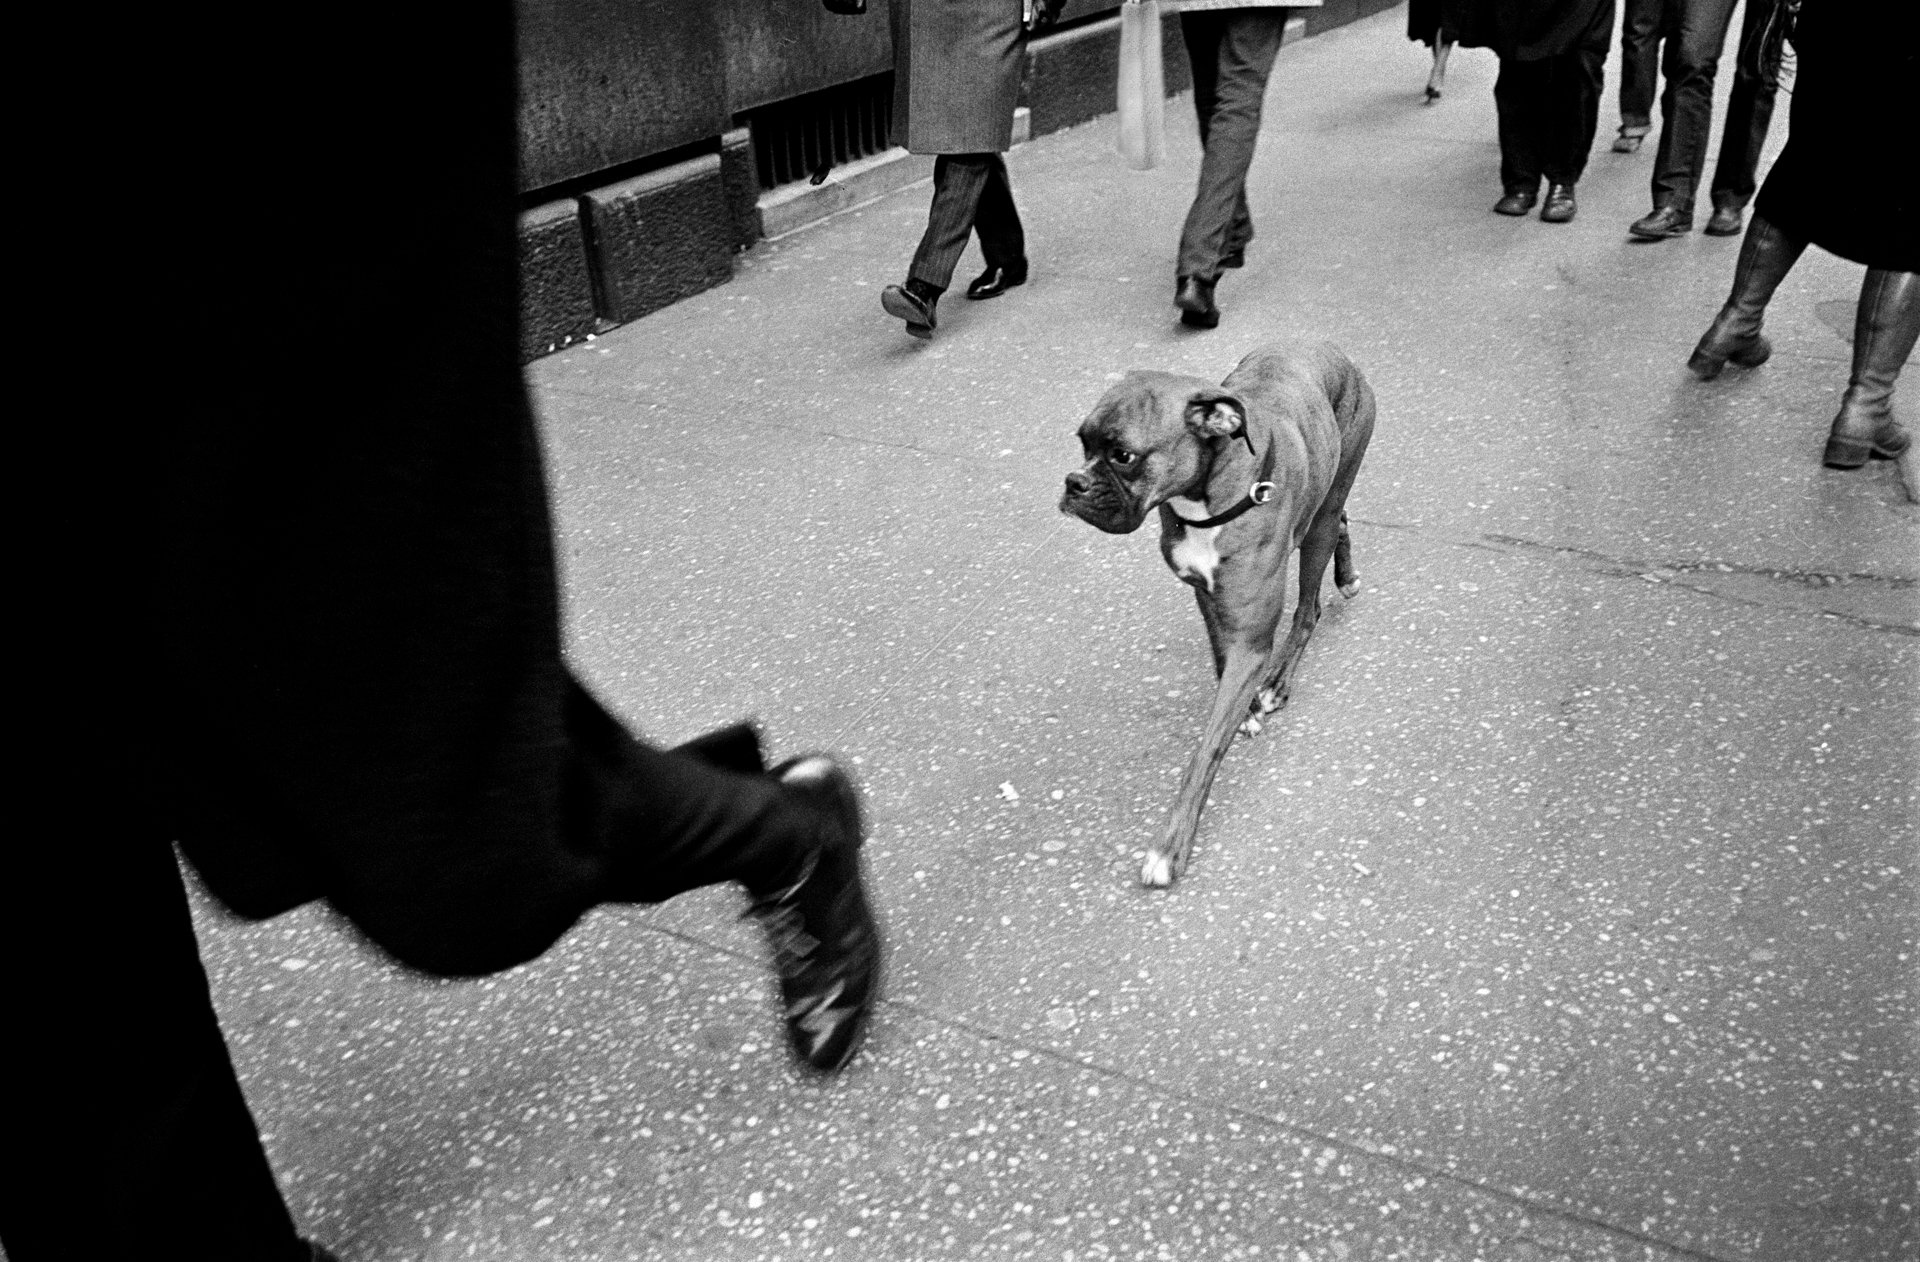 Dog, 5th Ave., NYC, 1980